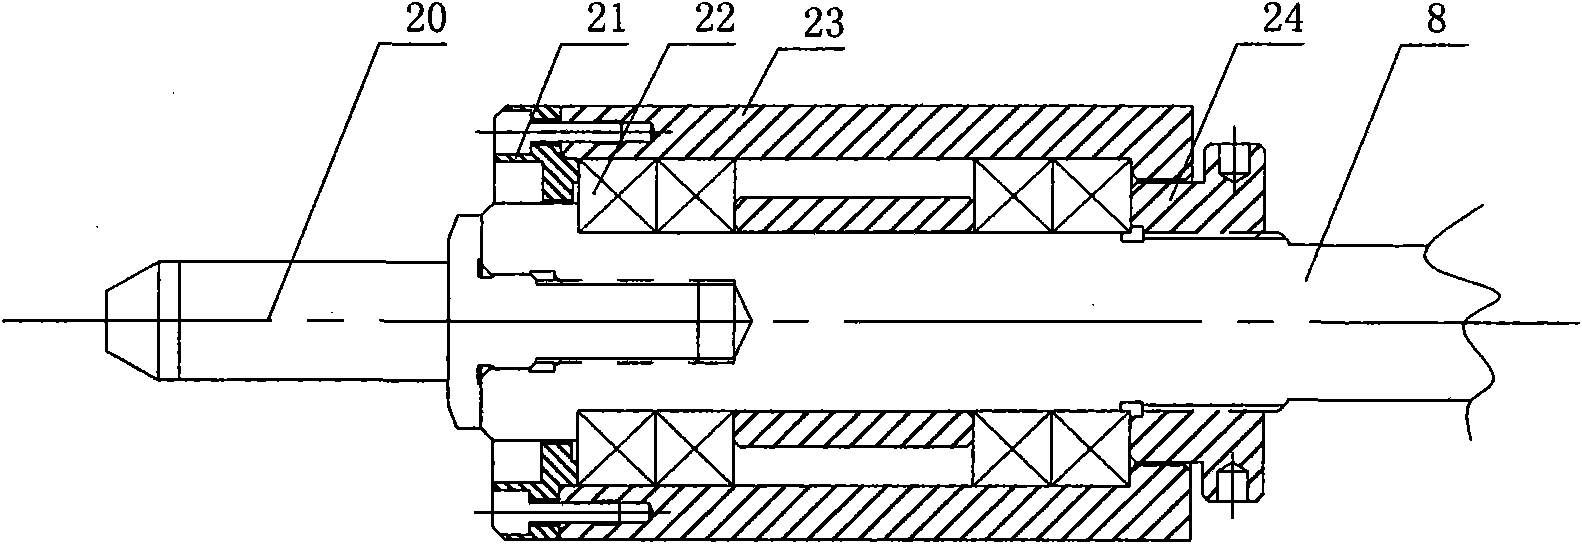 Crankshaft automatic positioning and clamping mechanism